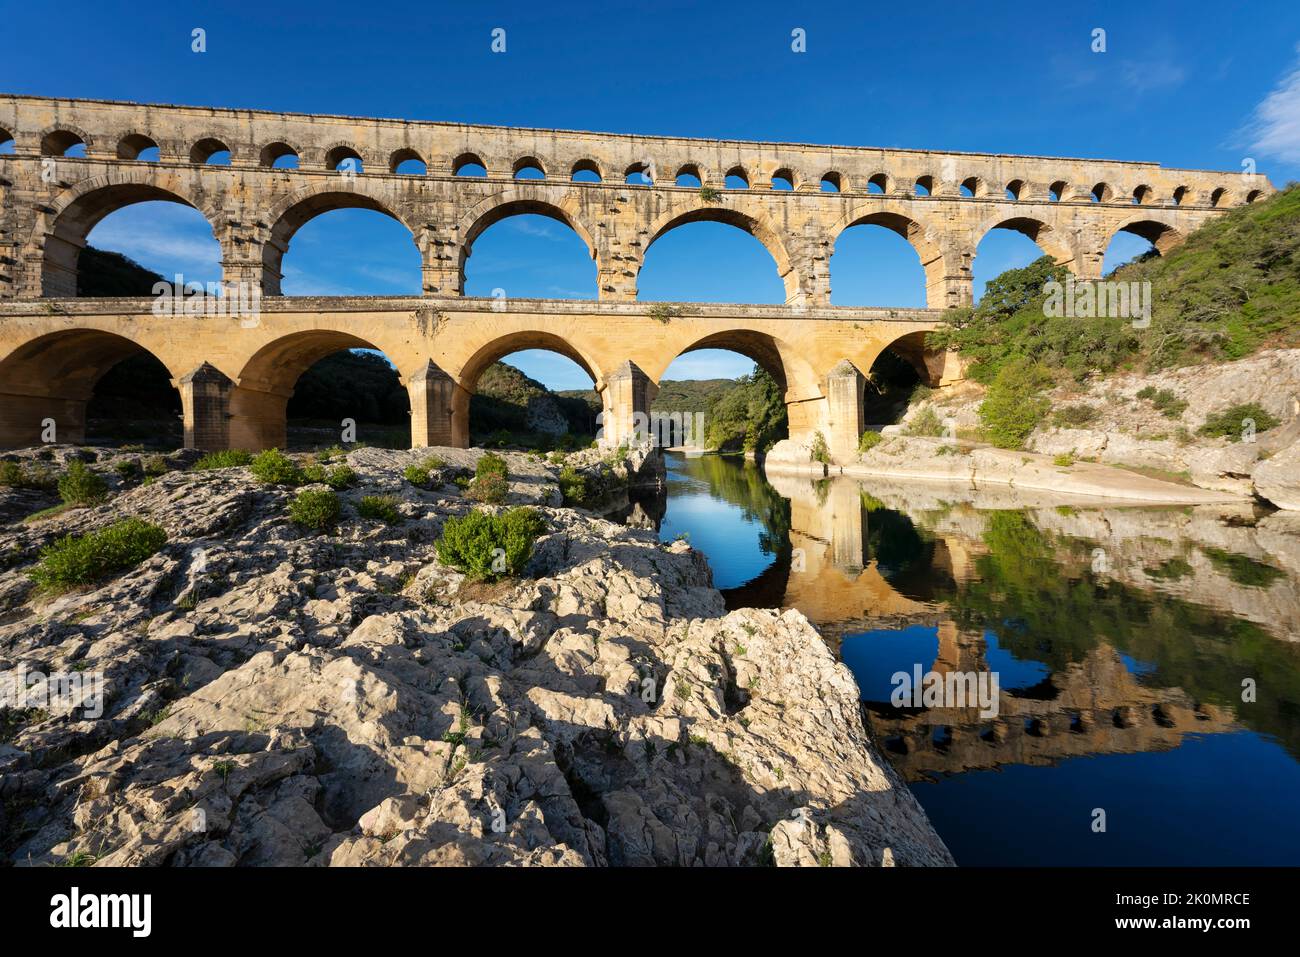 View of famous Pont du Gard, old roman aqueduct in France, Europe Stock Photo